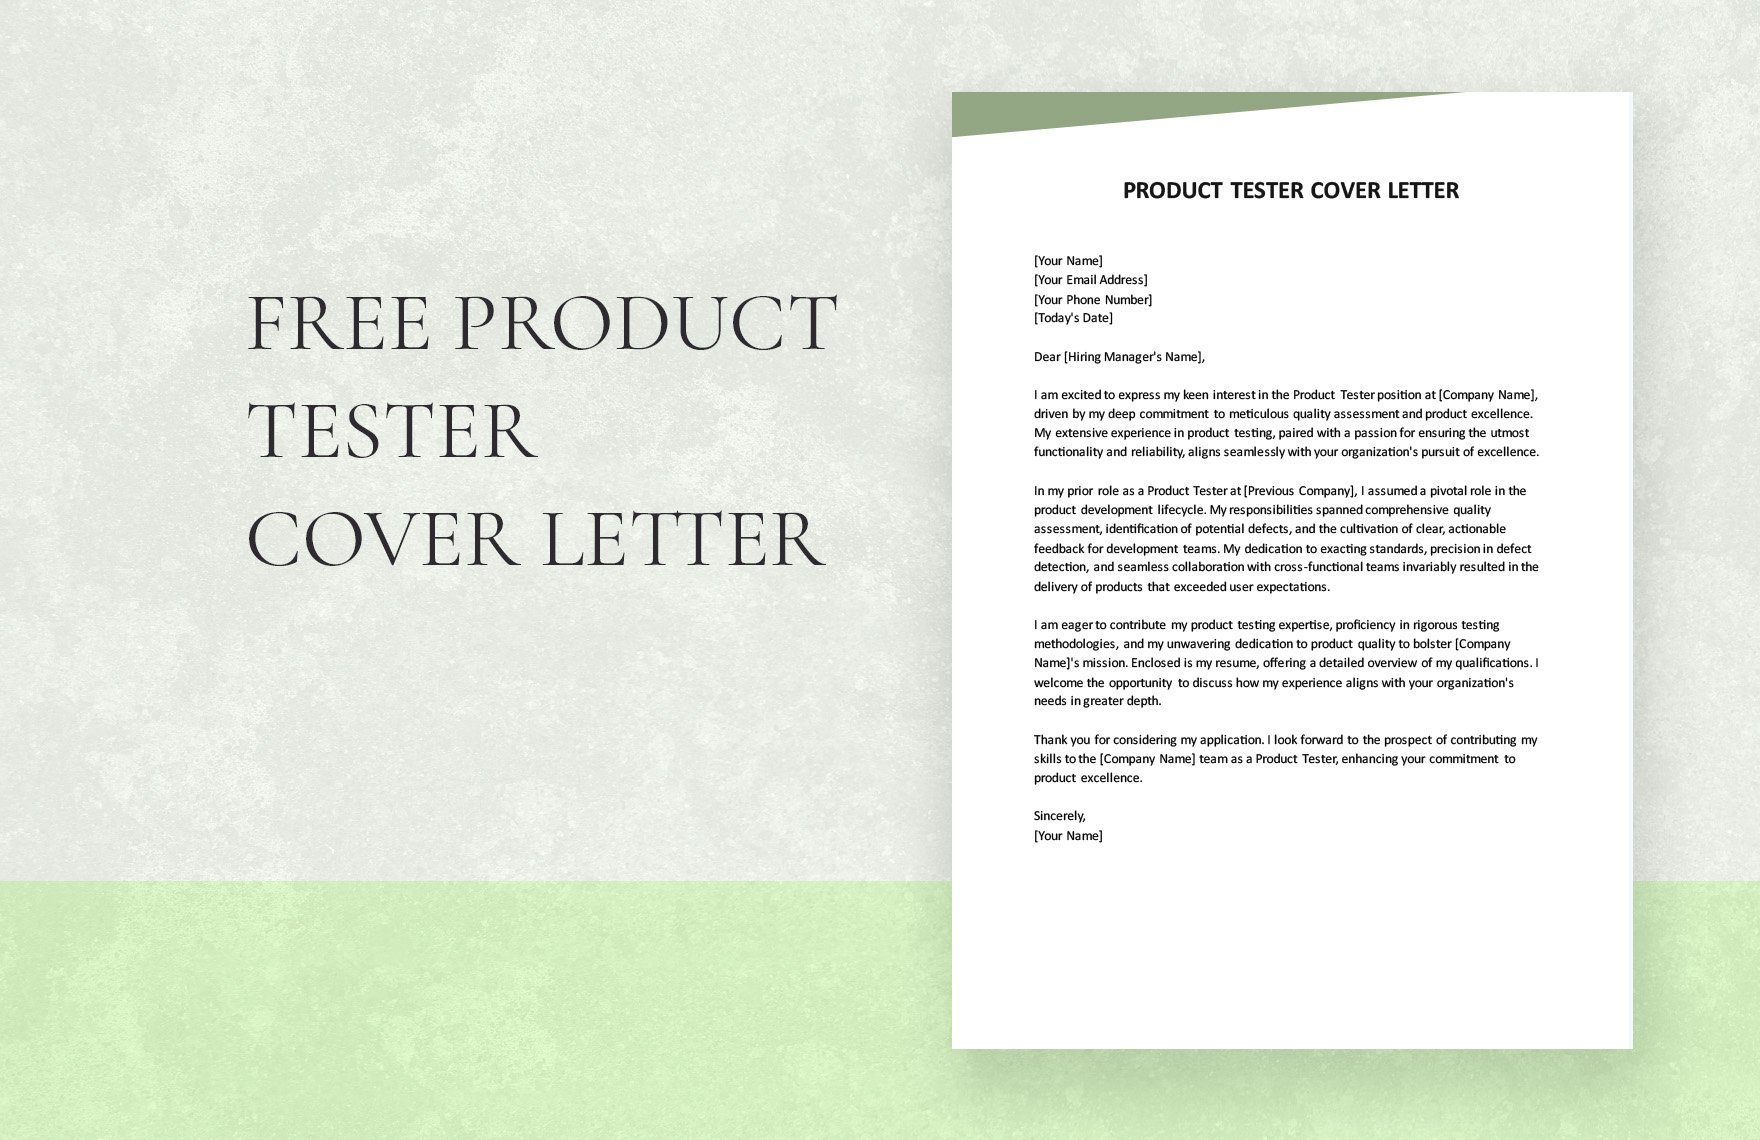 Tester Cover Letter Template in PDF - FREE Download